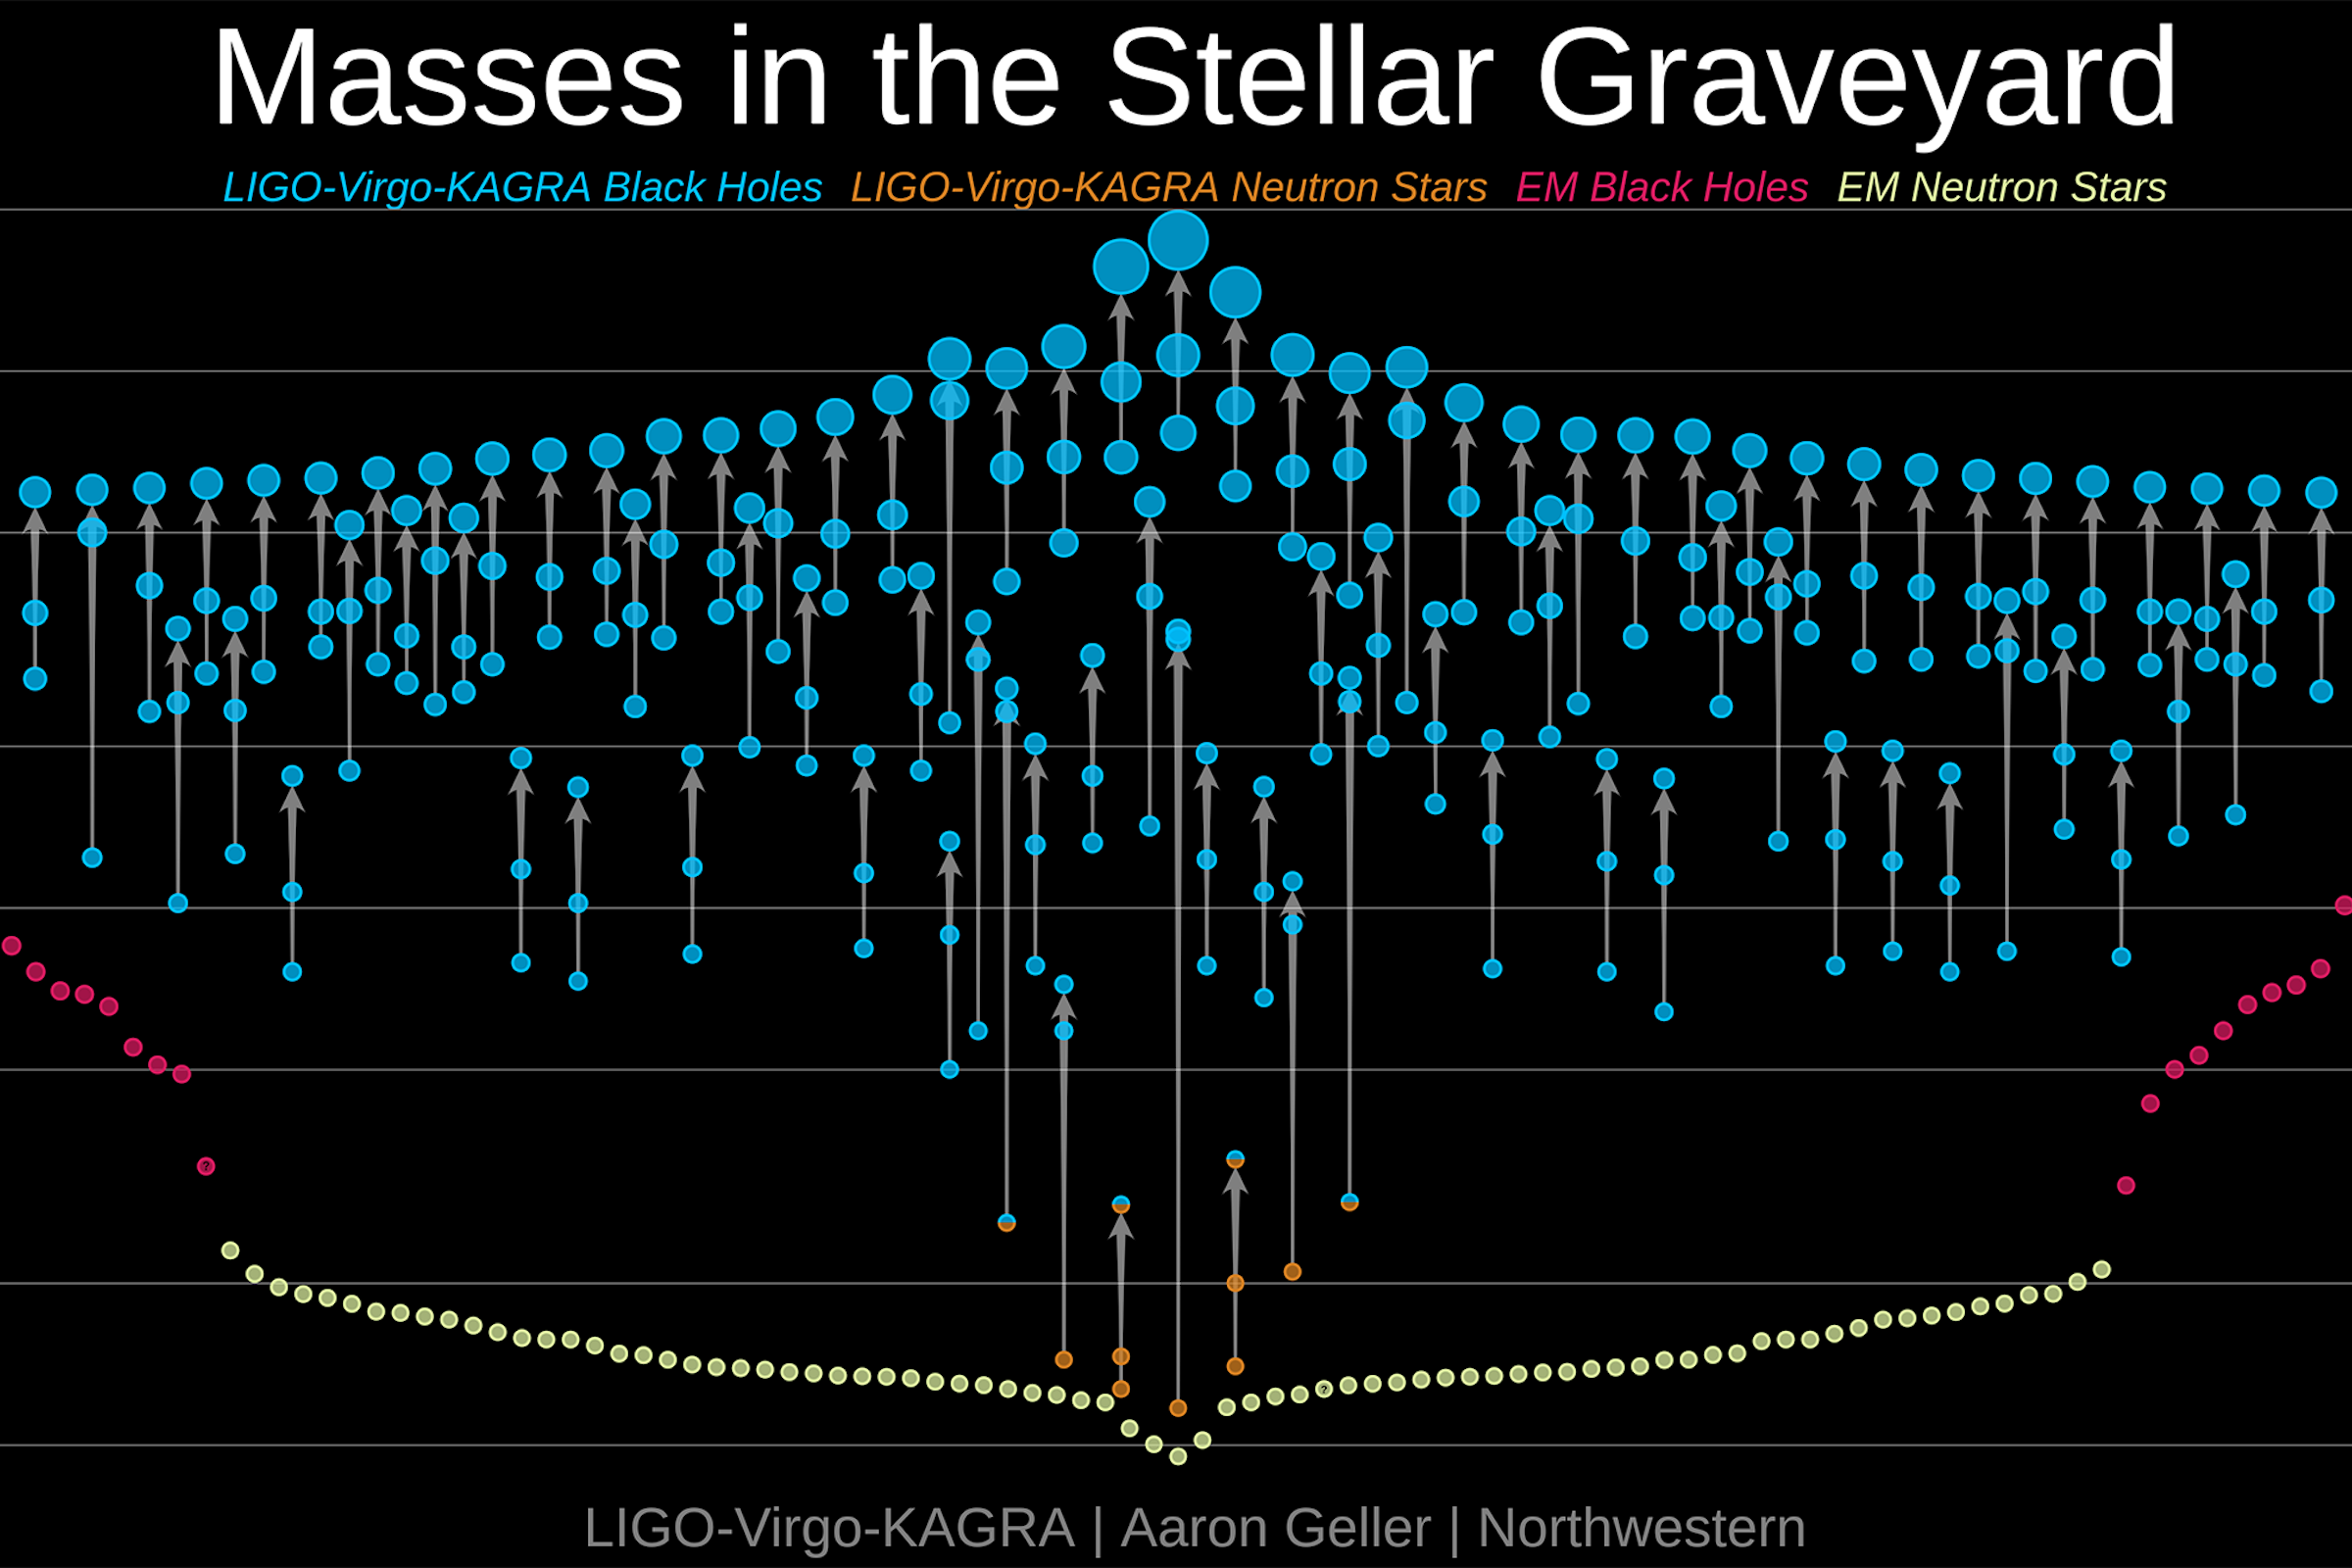 Chart showing masses of more than 100 black holes and neutron stars detected by gravitational waves